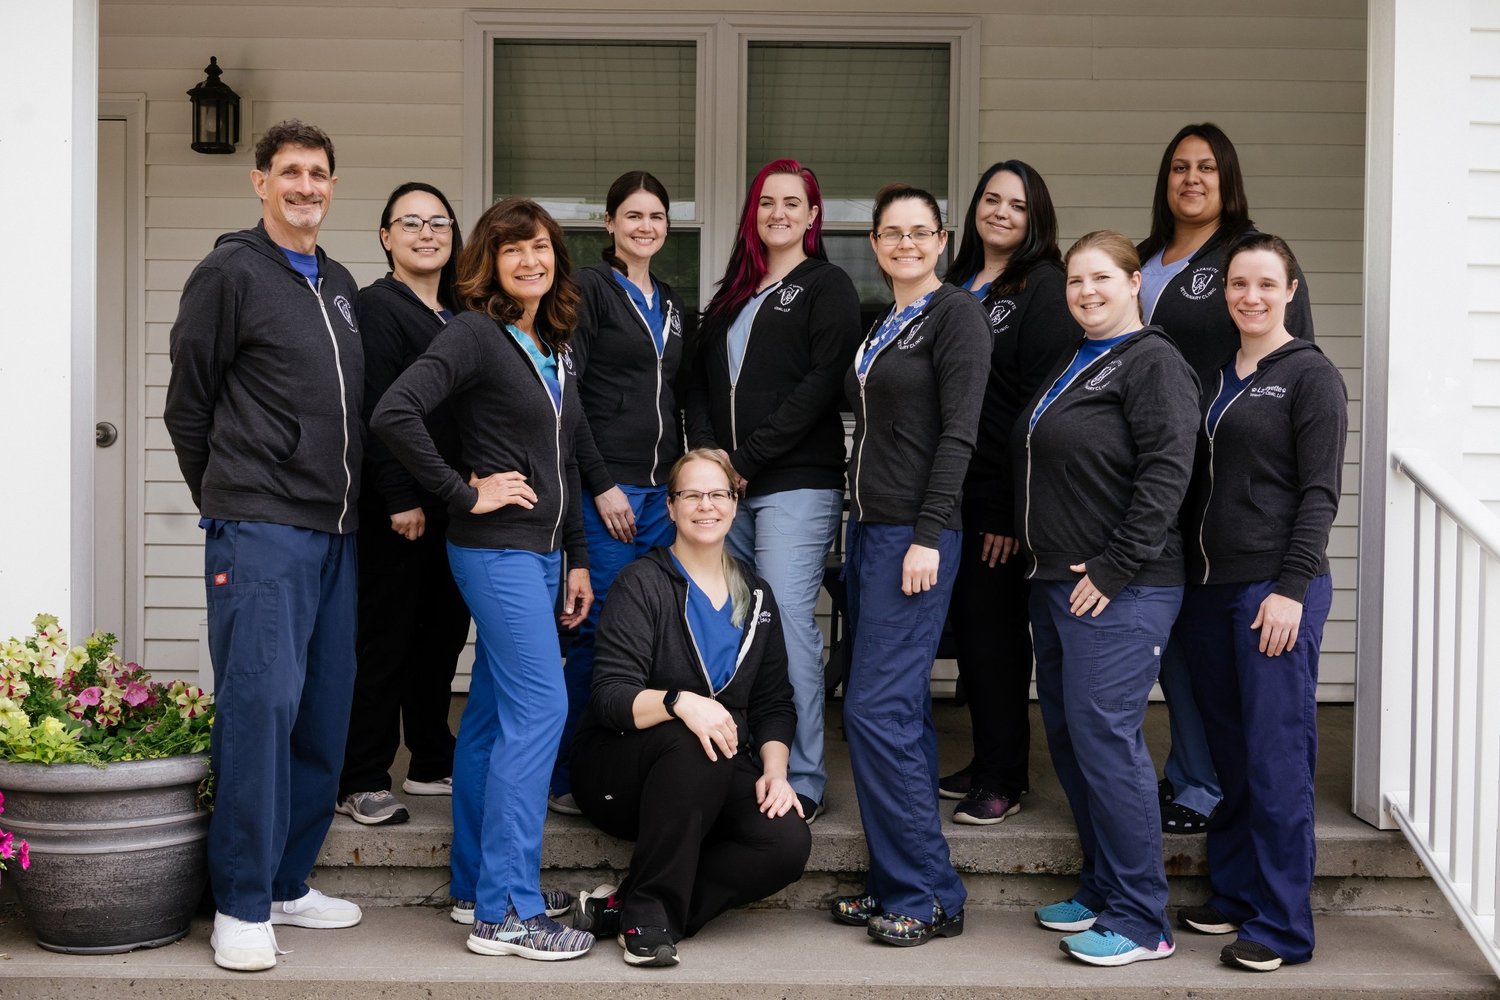 About Us — LAFAYETTE VETERINARY CLINIC